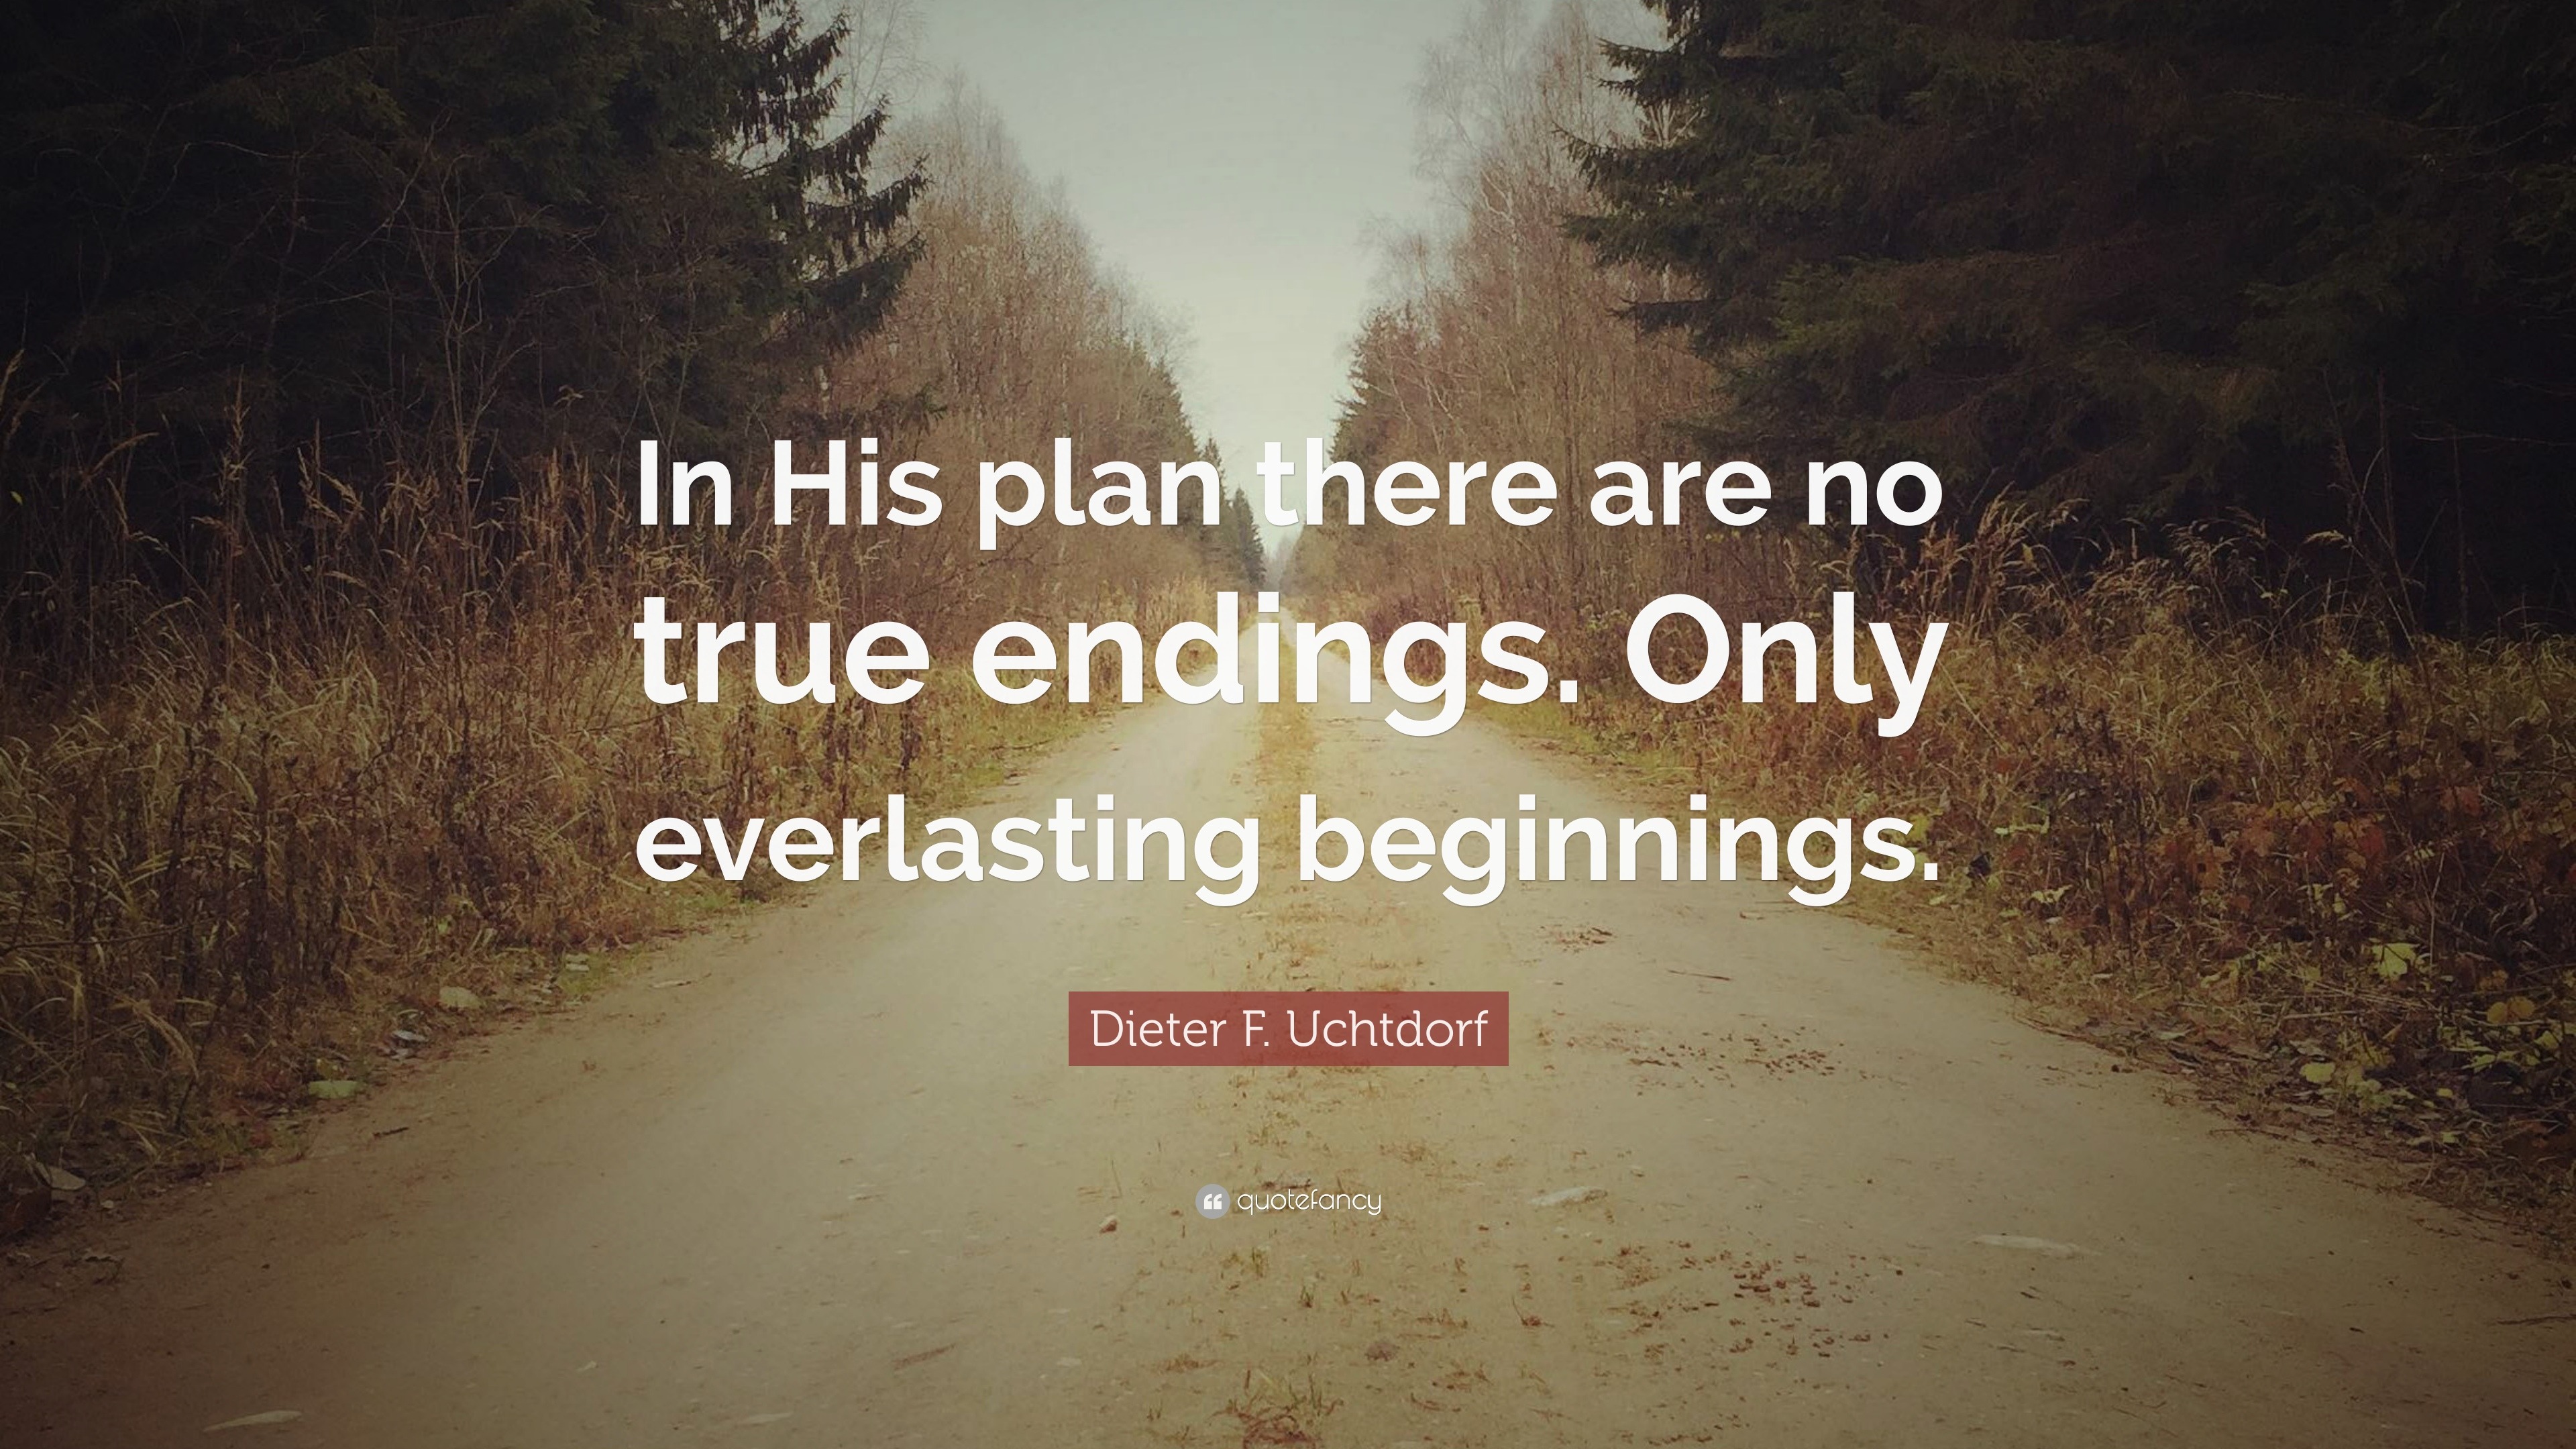 https://quotefancy.com/media/wallpaper/3840x2160/384001-Dieter-F-Uchtdorf-Quote-In-His-plan-there-are-no-true-endings-Only.jpg